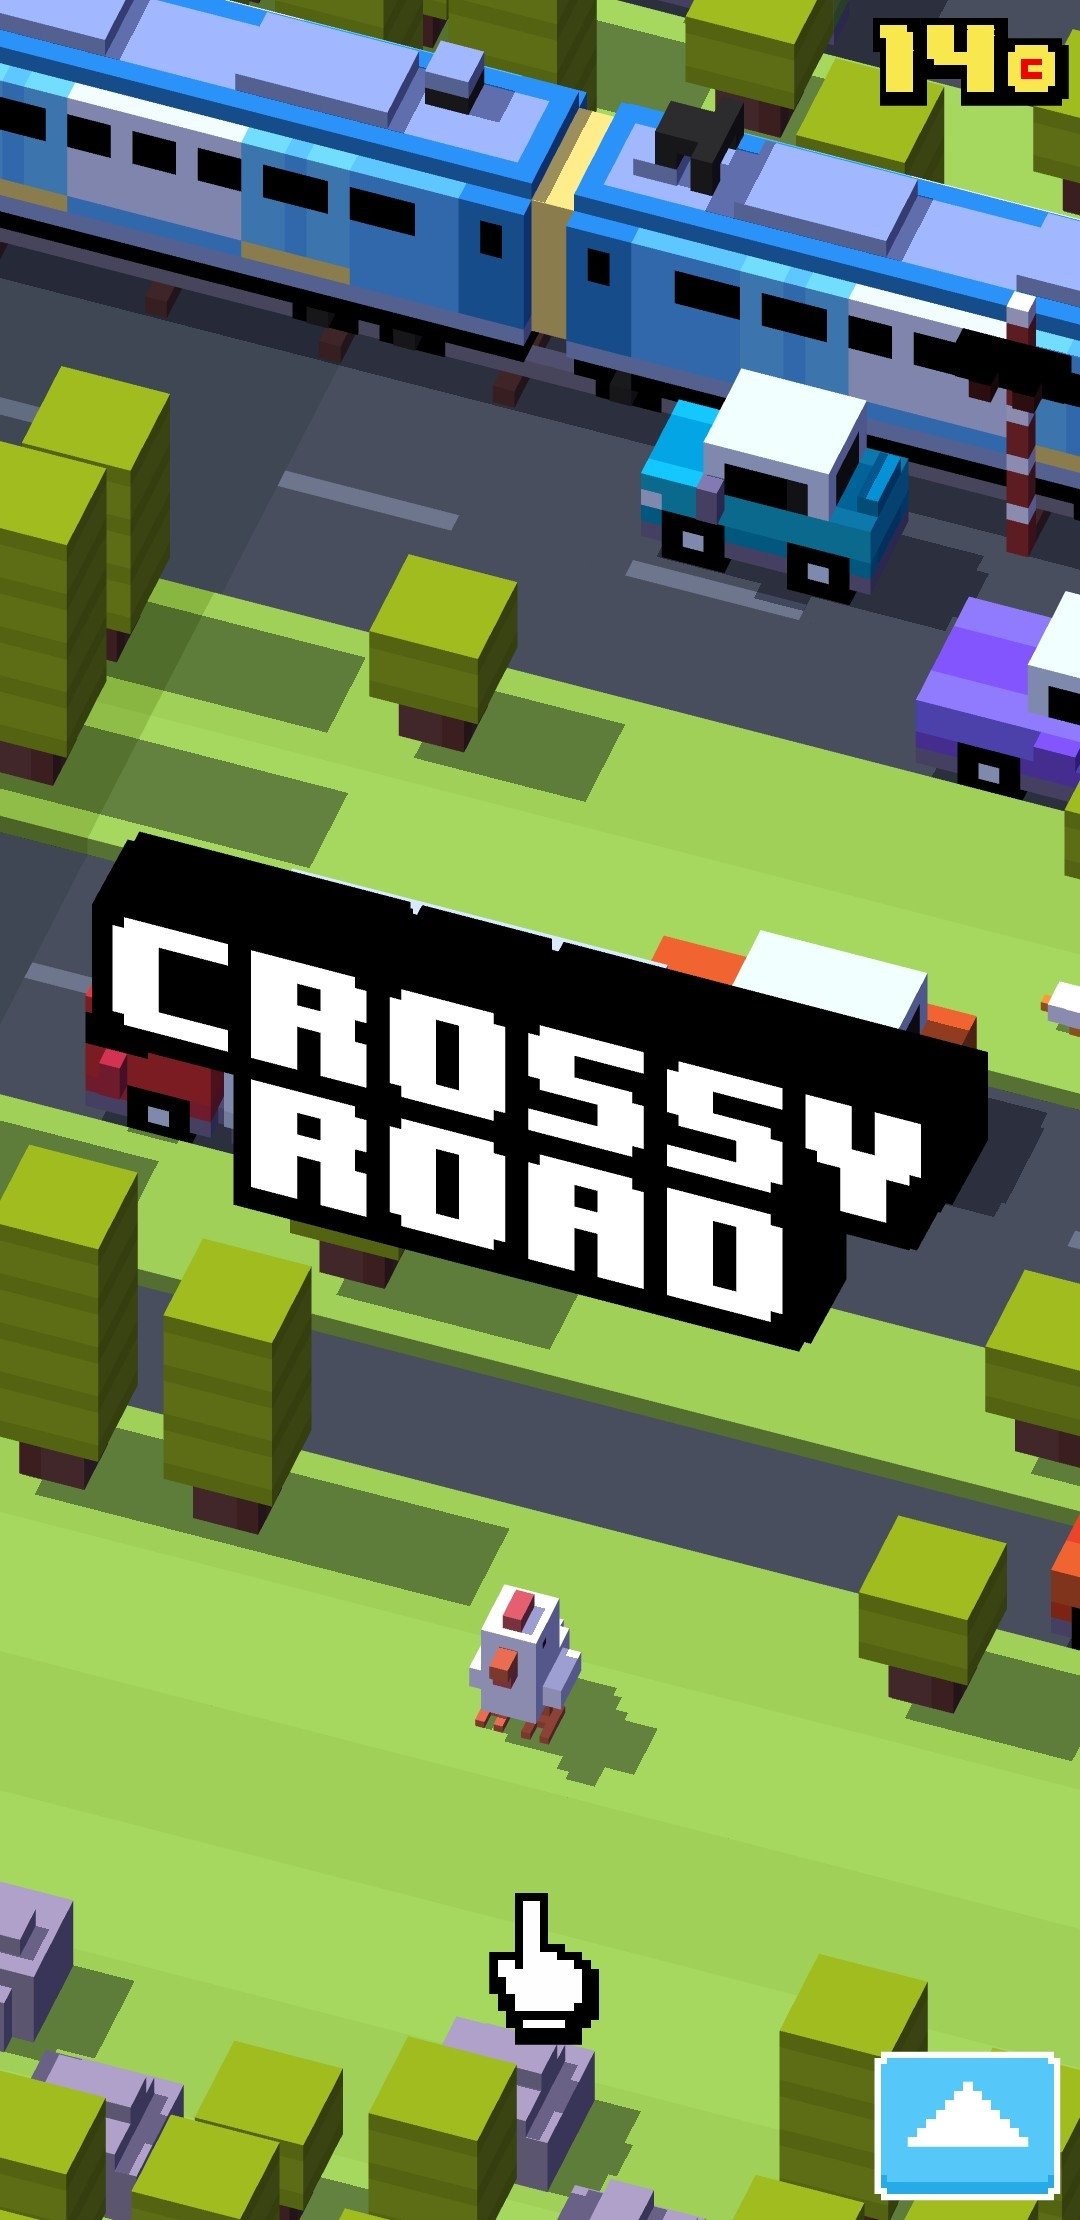 Plant Crossy Road to Escape mobile android iOS apk download for